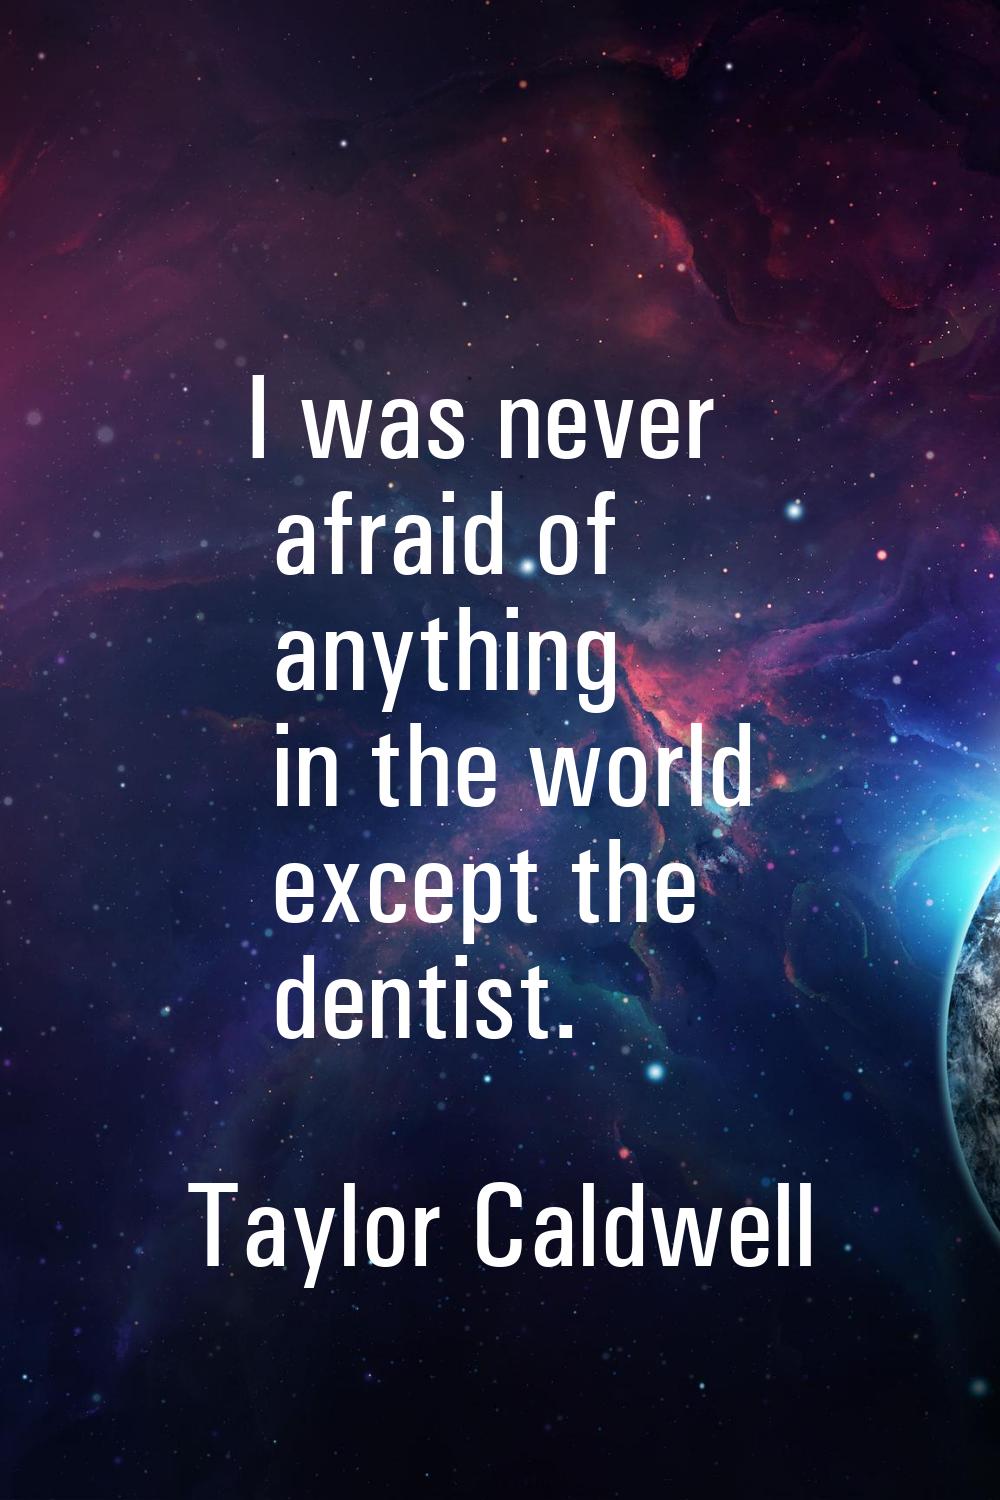 I was never afraid of anything in the world except the dentist.